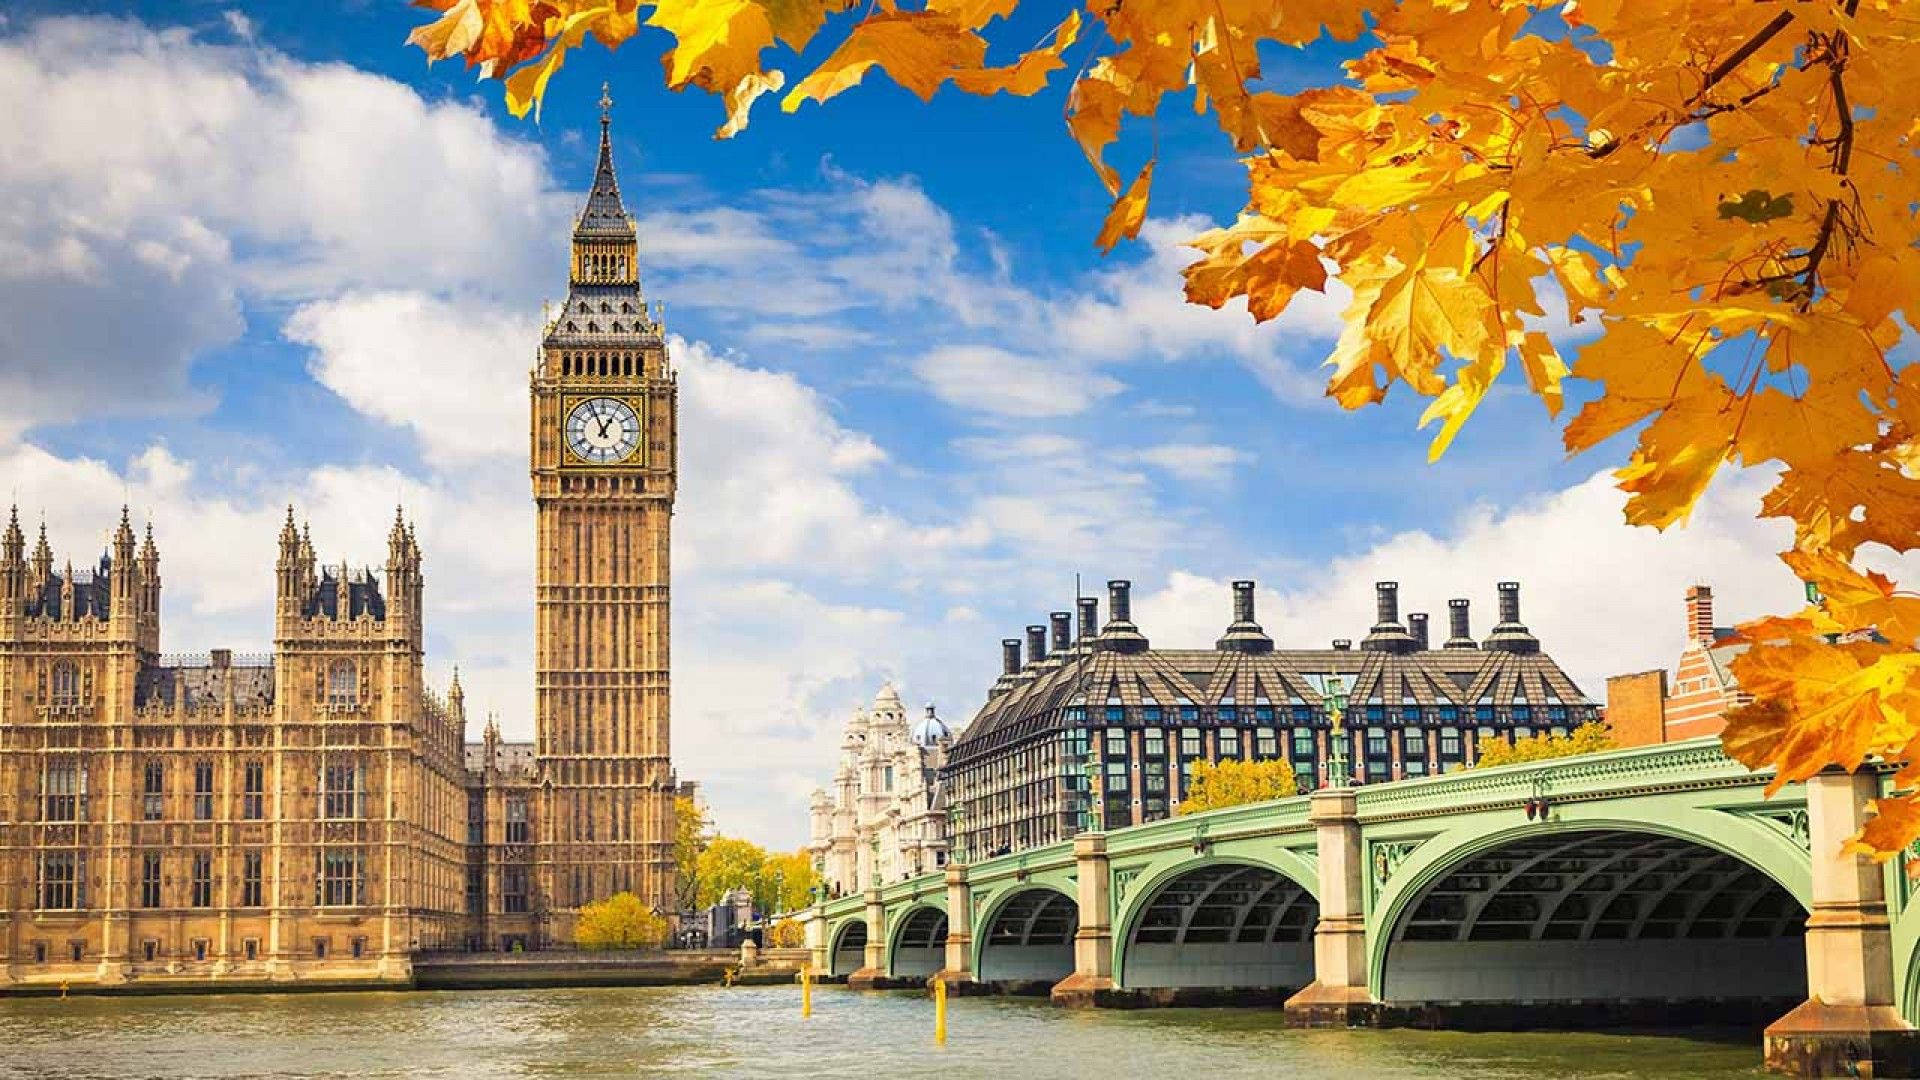 London's Big Ben In Europe Picture